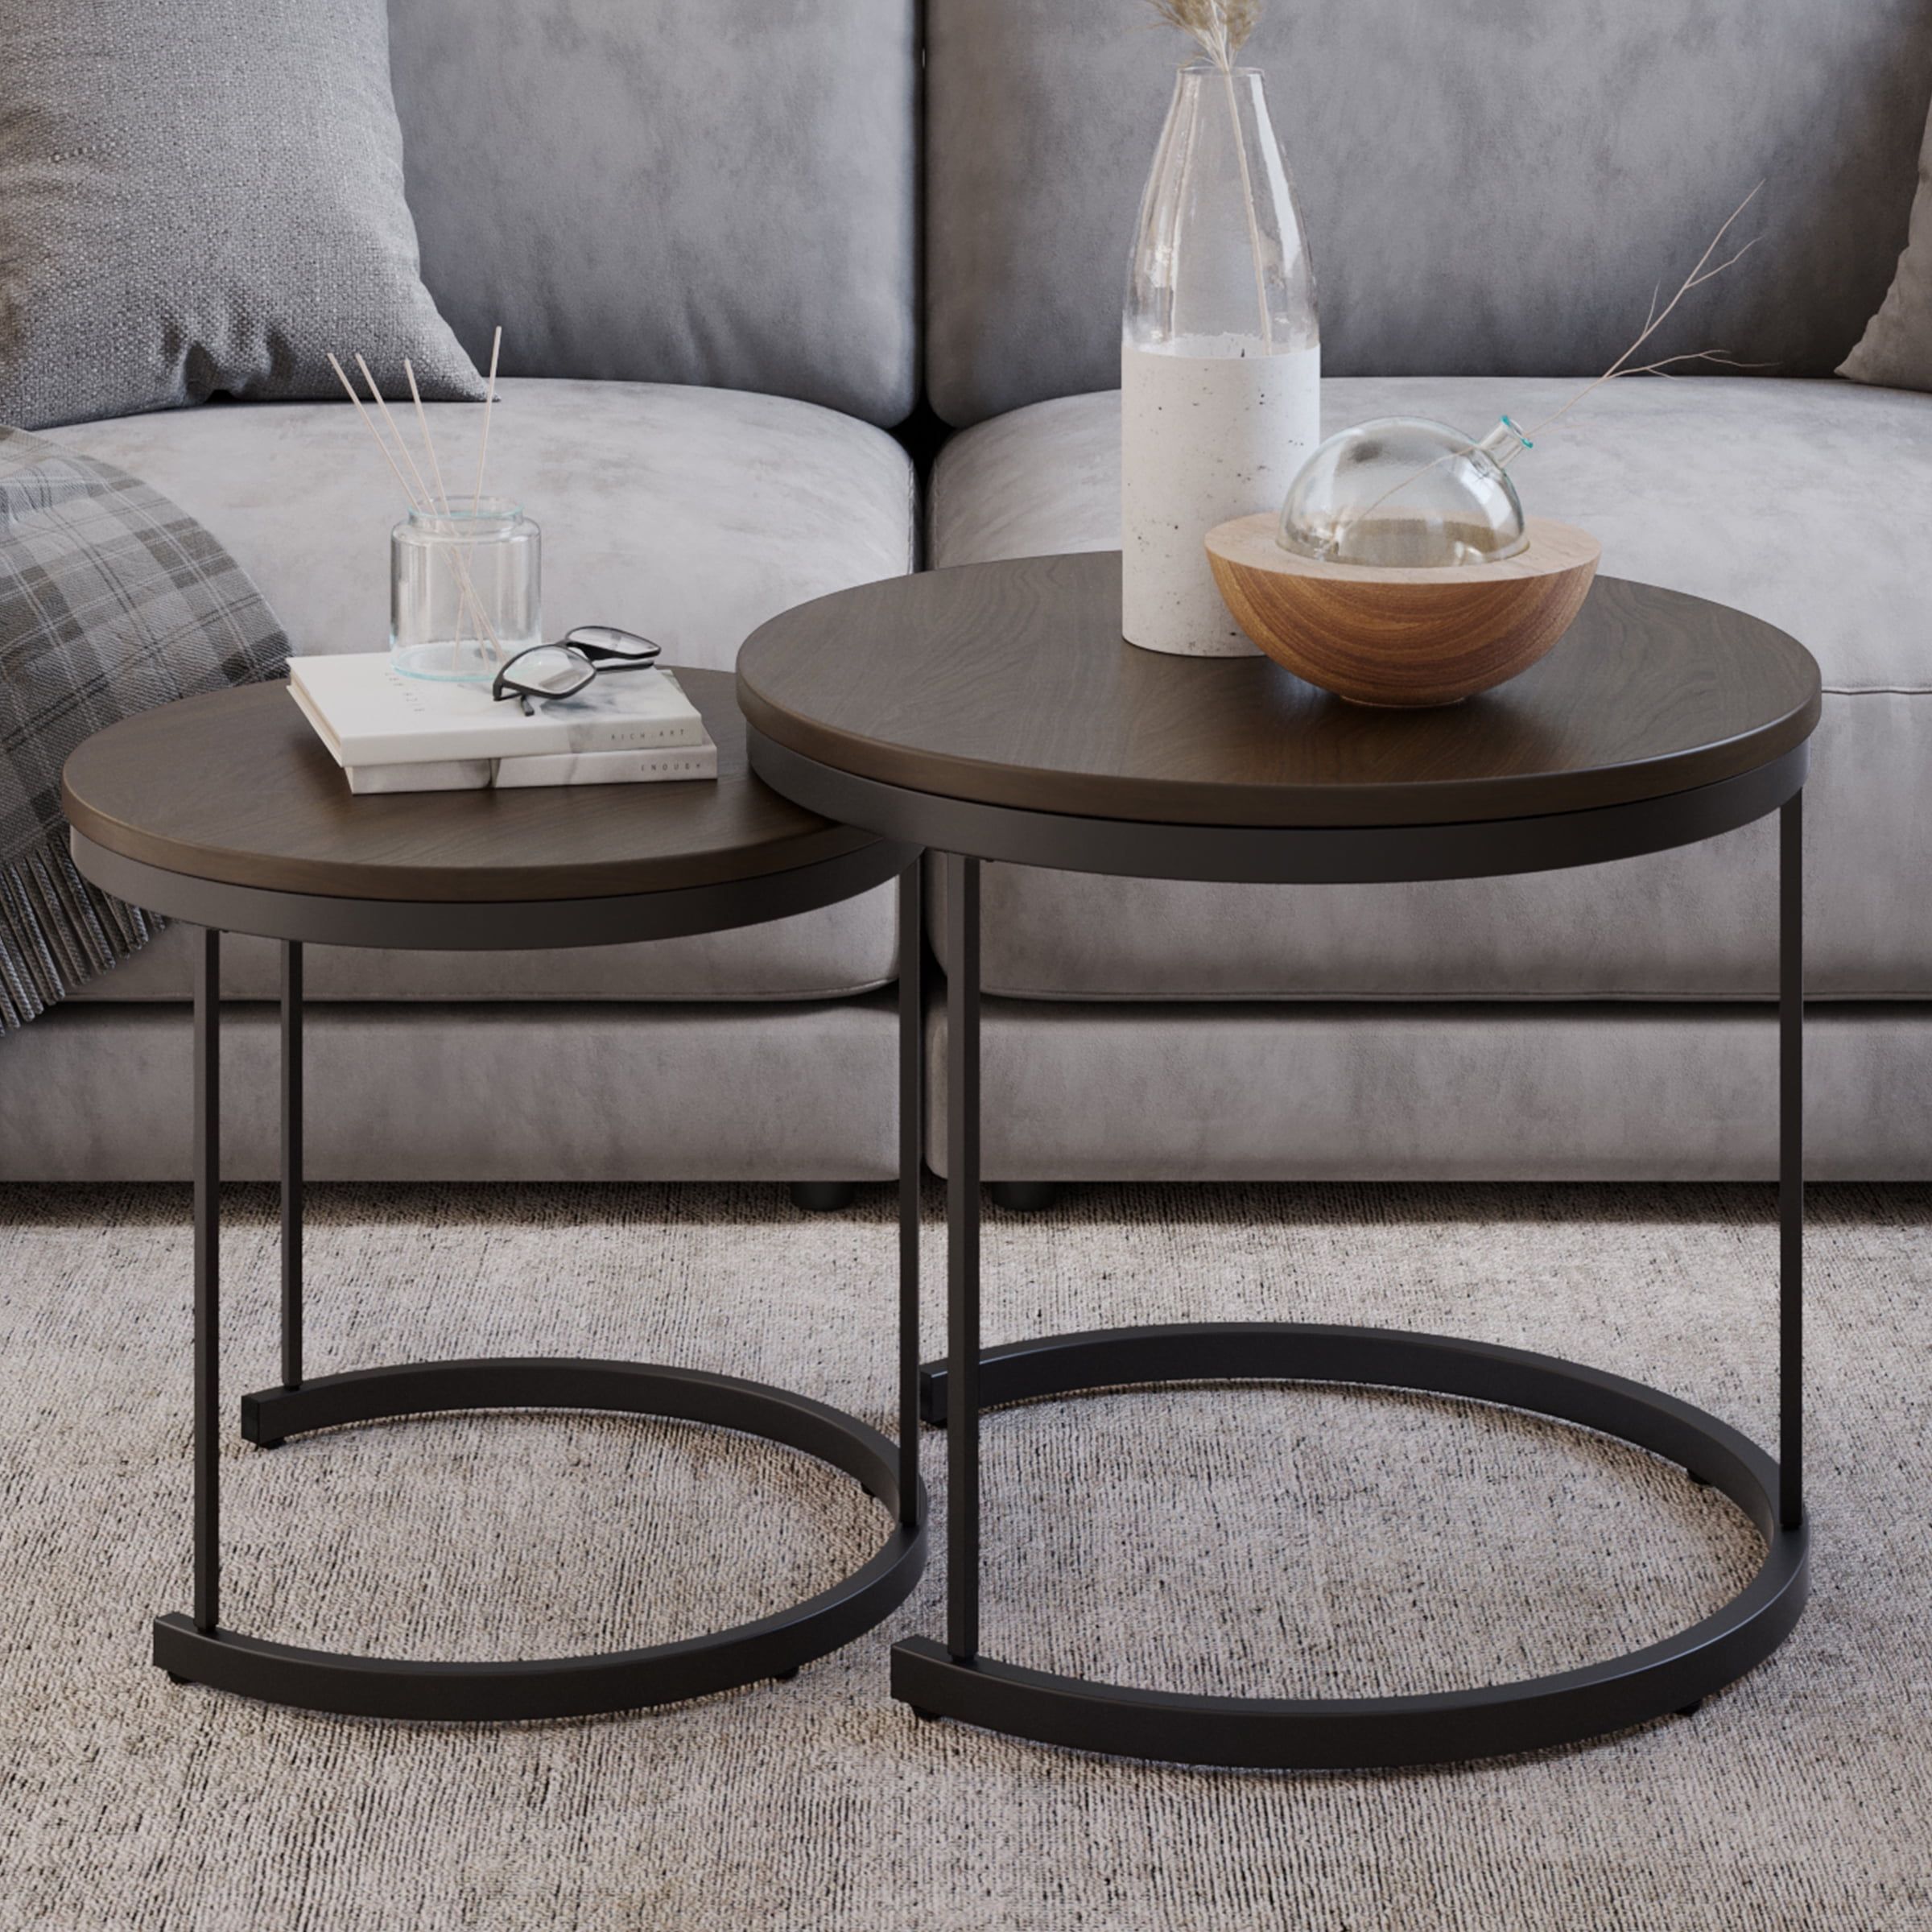 Lavish Home Nesting Coffee Table Small Round Tables Nest Together, Brown,  Set Of 2 – Walmart With Regard To Nesting Coffee Tables (Photo 3 of 15)